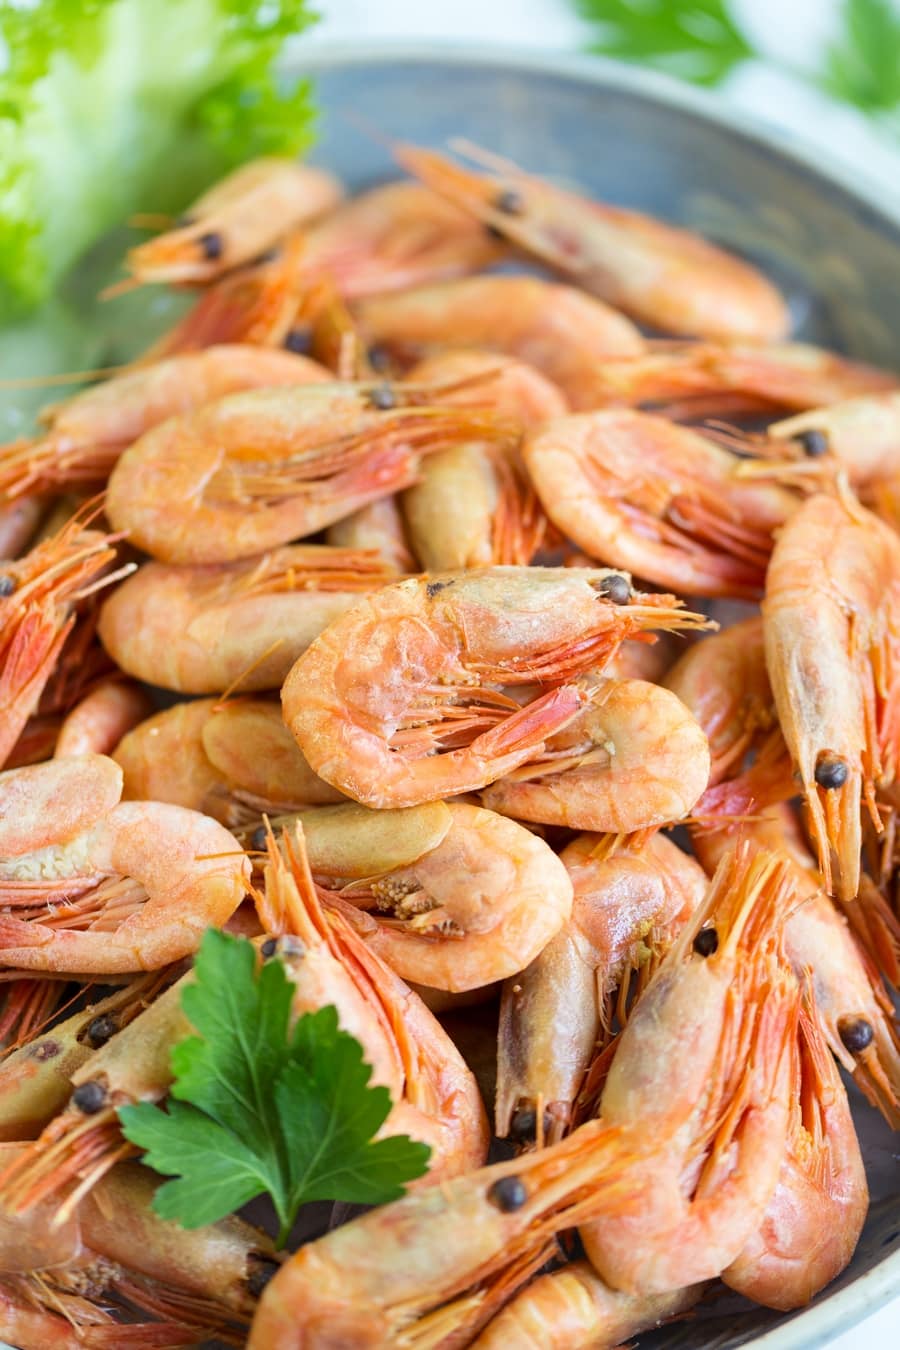 Closeup of smoked shrimps in a bowl.